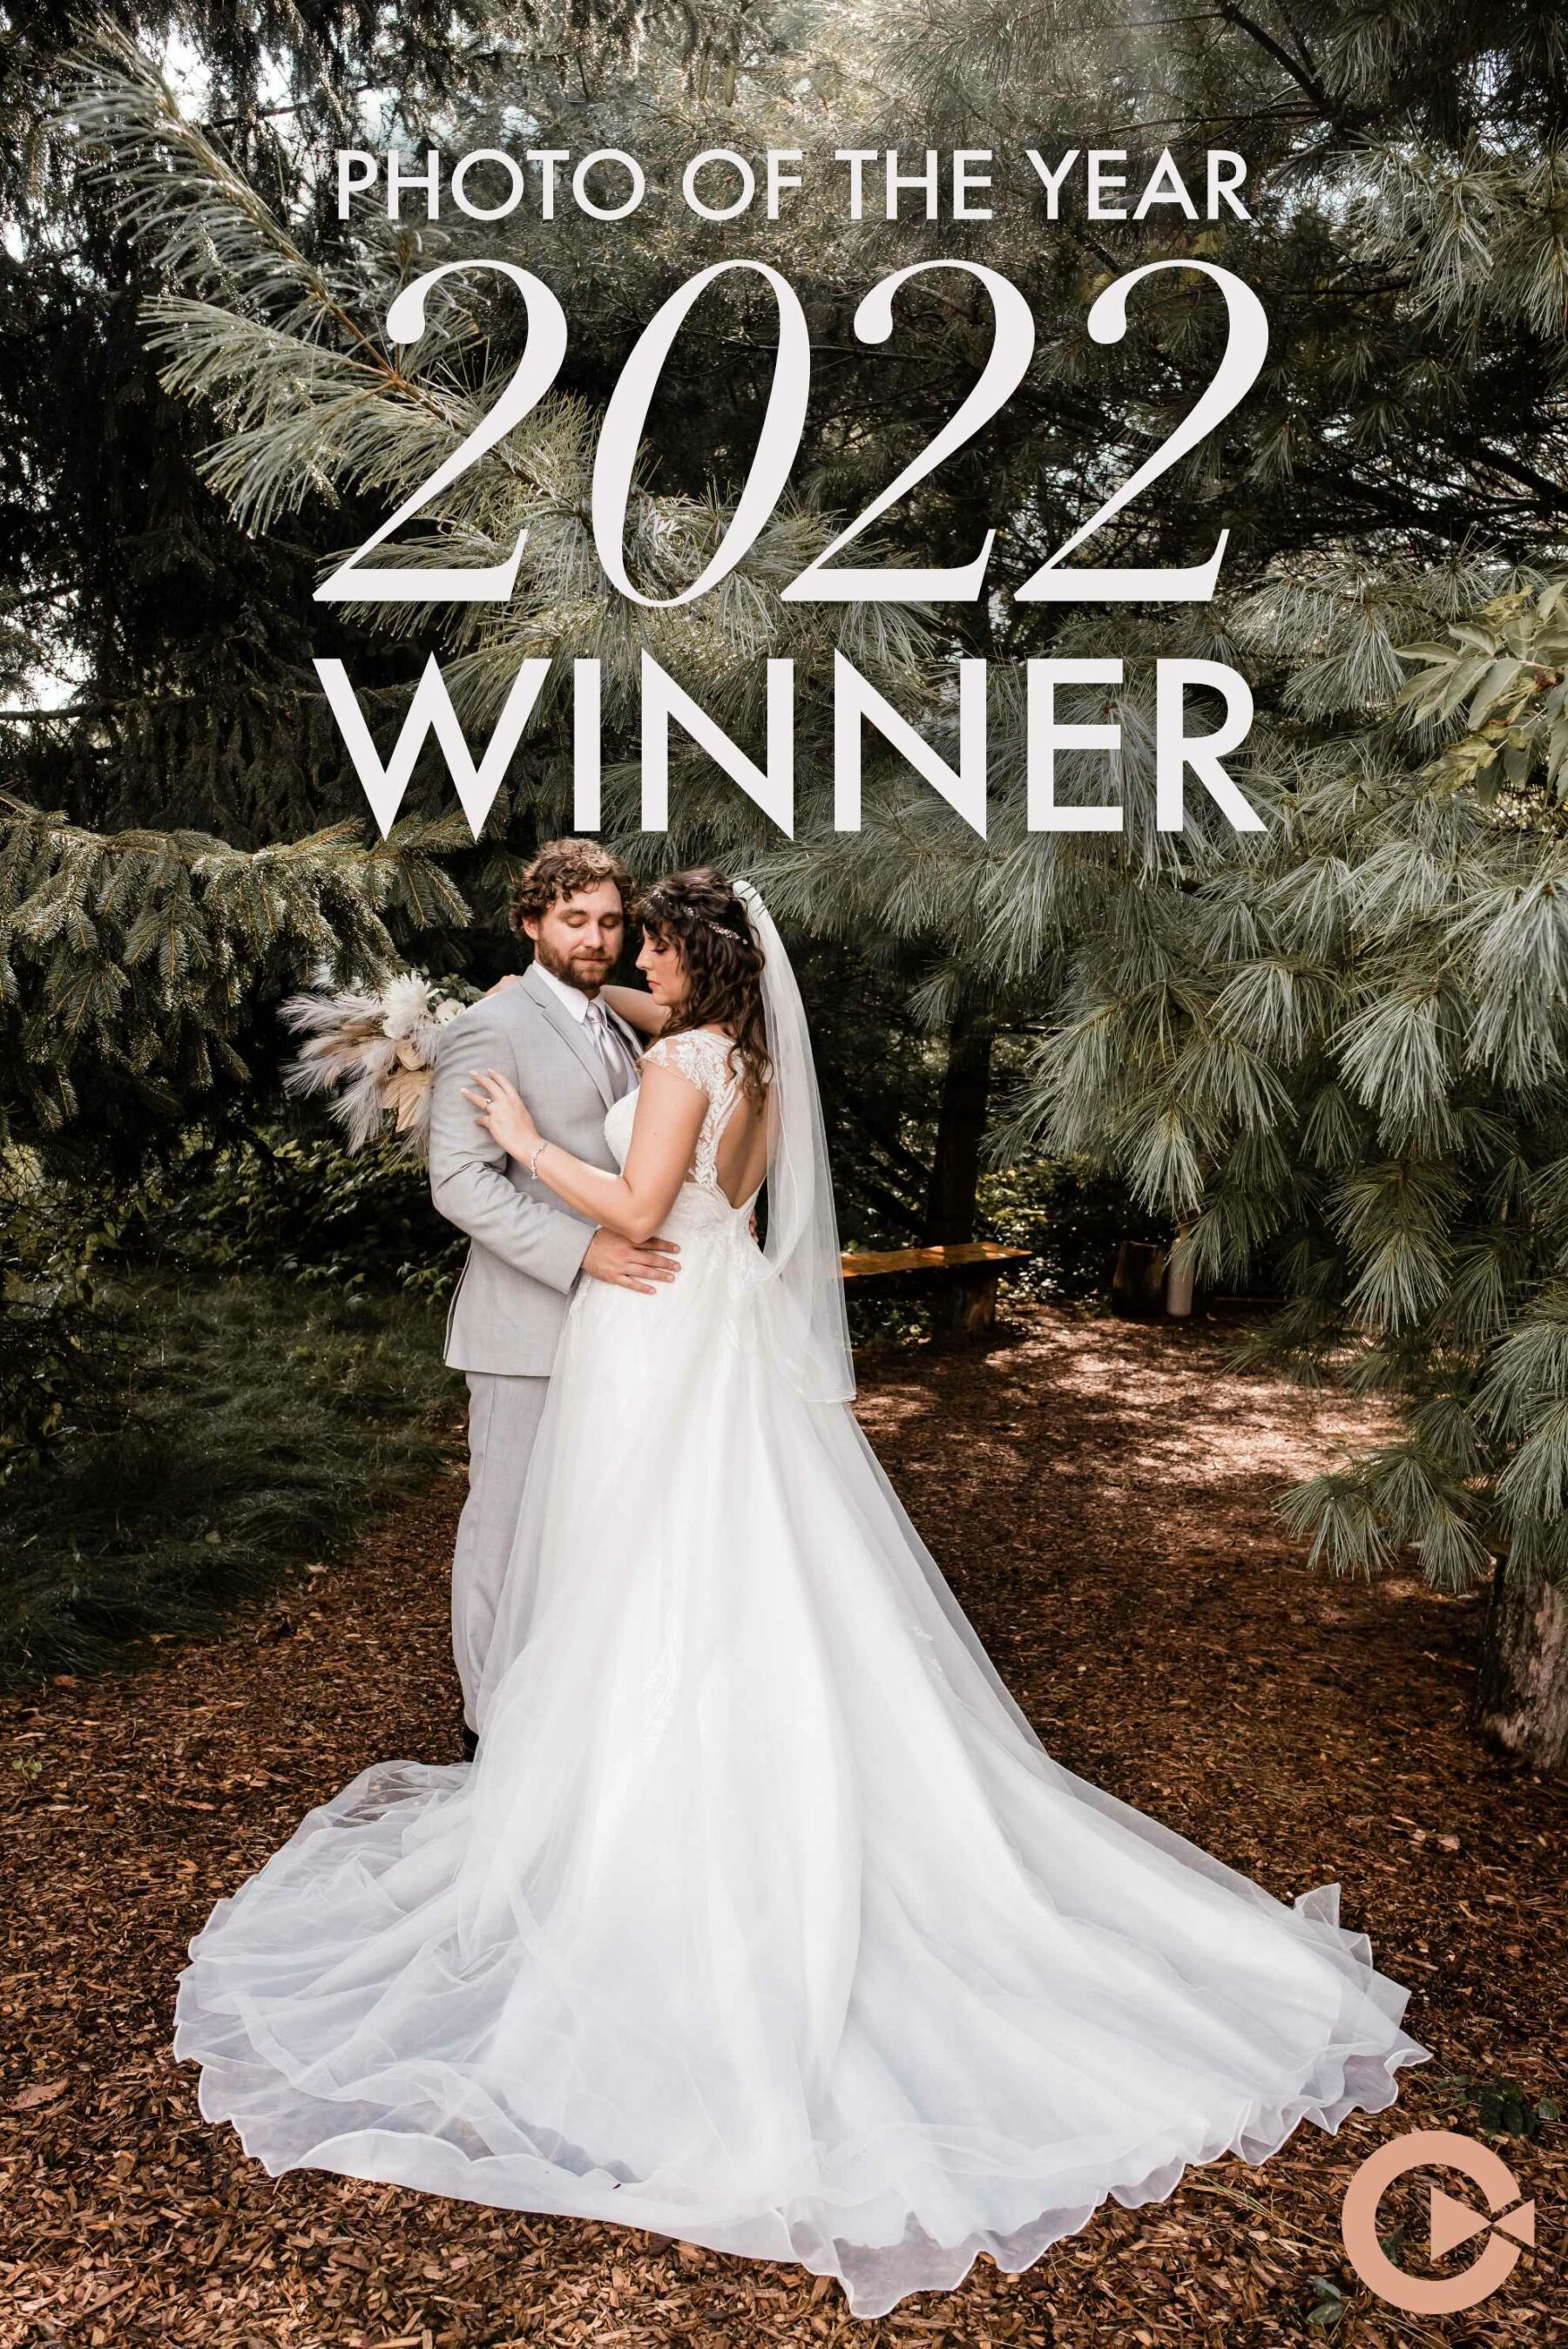 Complete Weddings + Events Grand Rapids 2022 Photo of the year